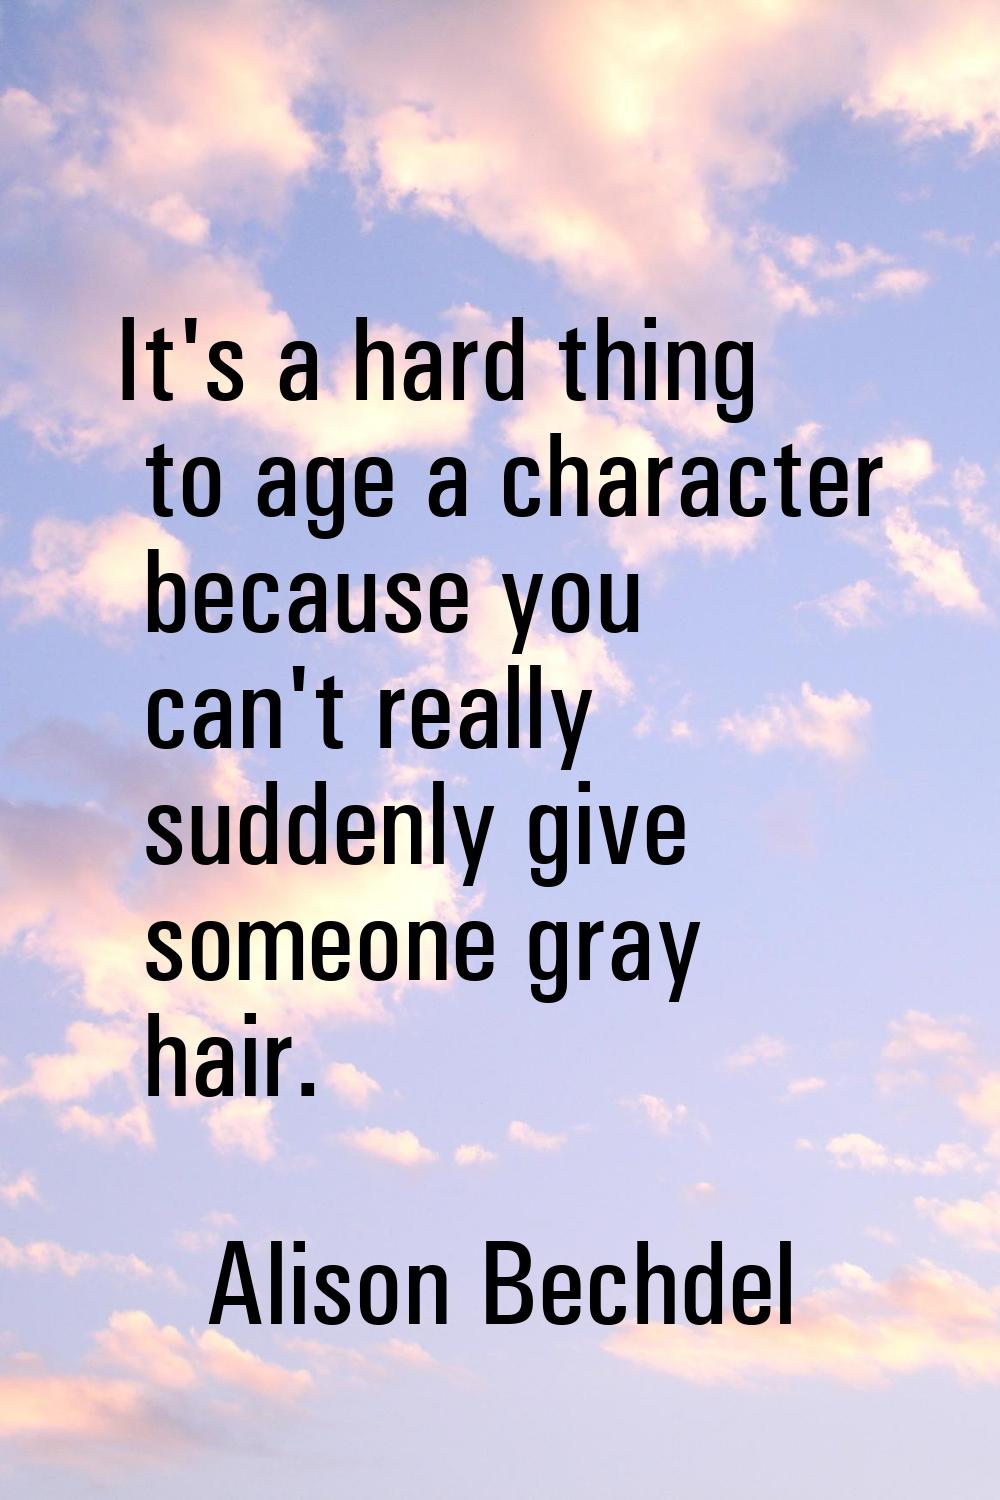 It's a hard thing to age a character because you can't really suddenly give someone gray hair.